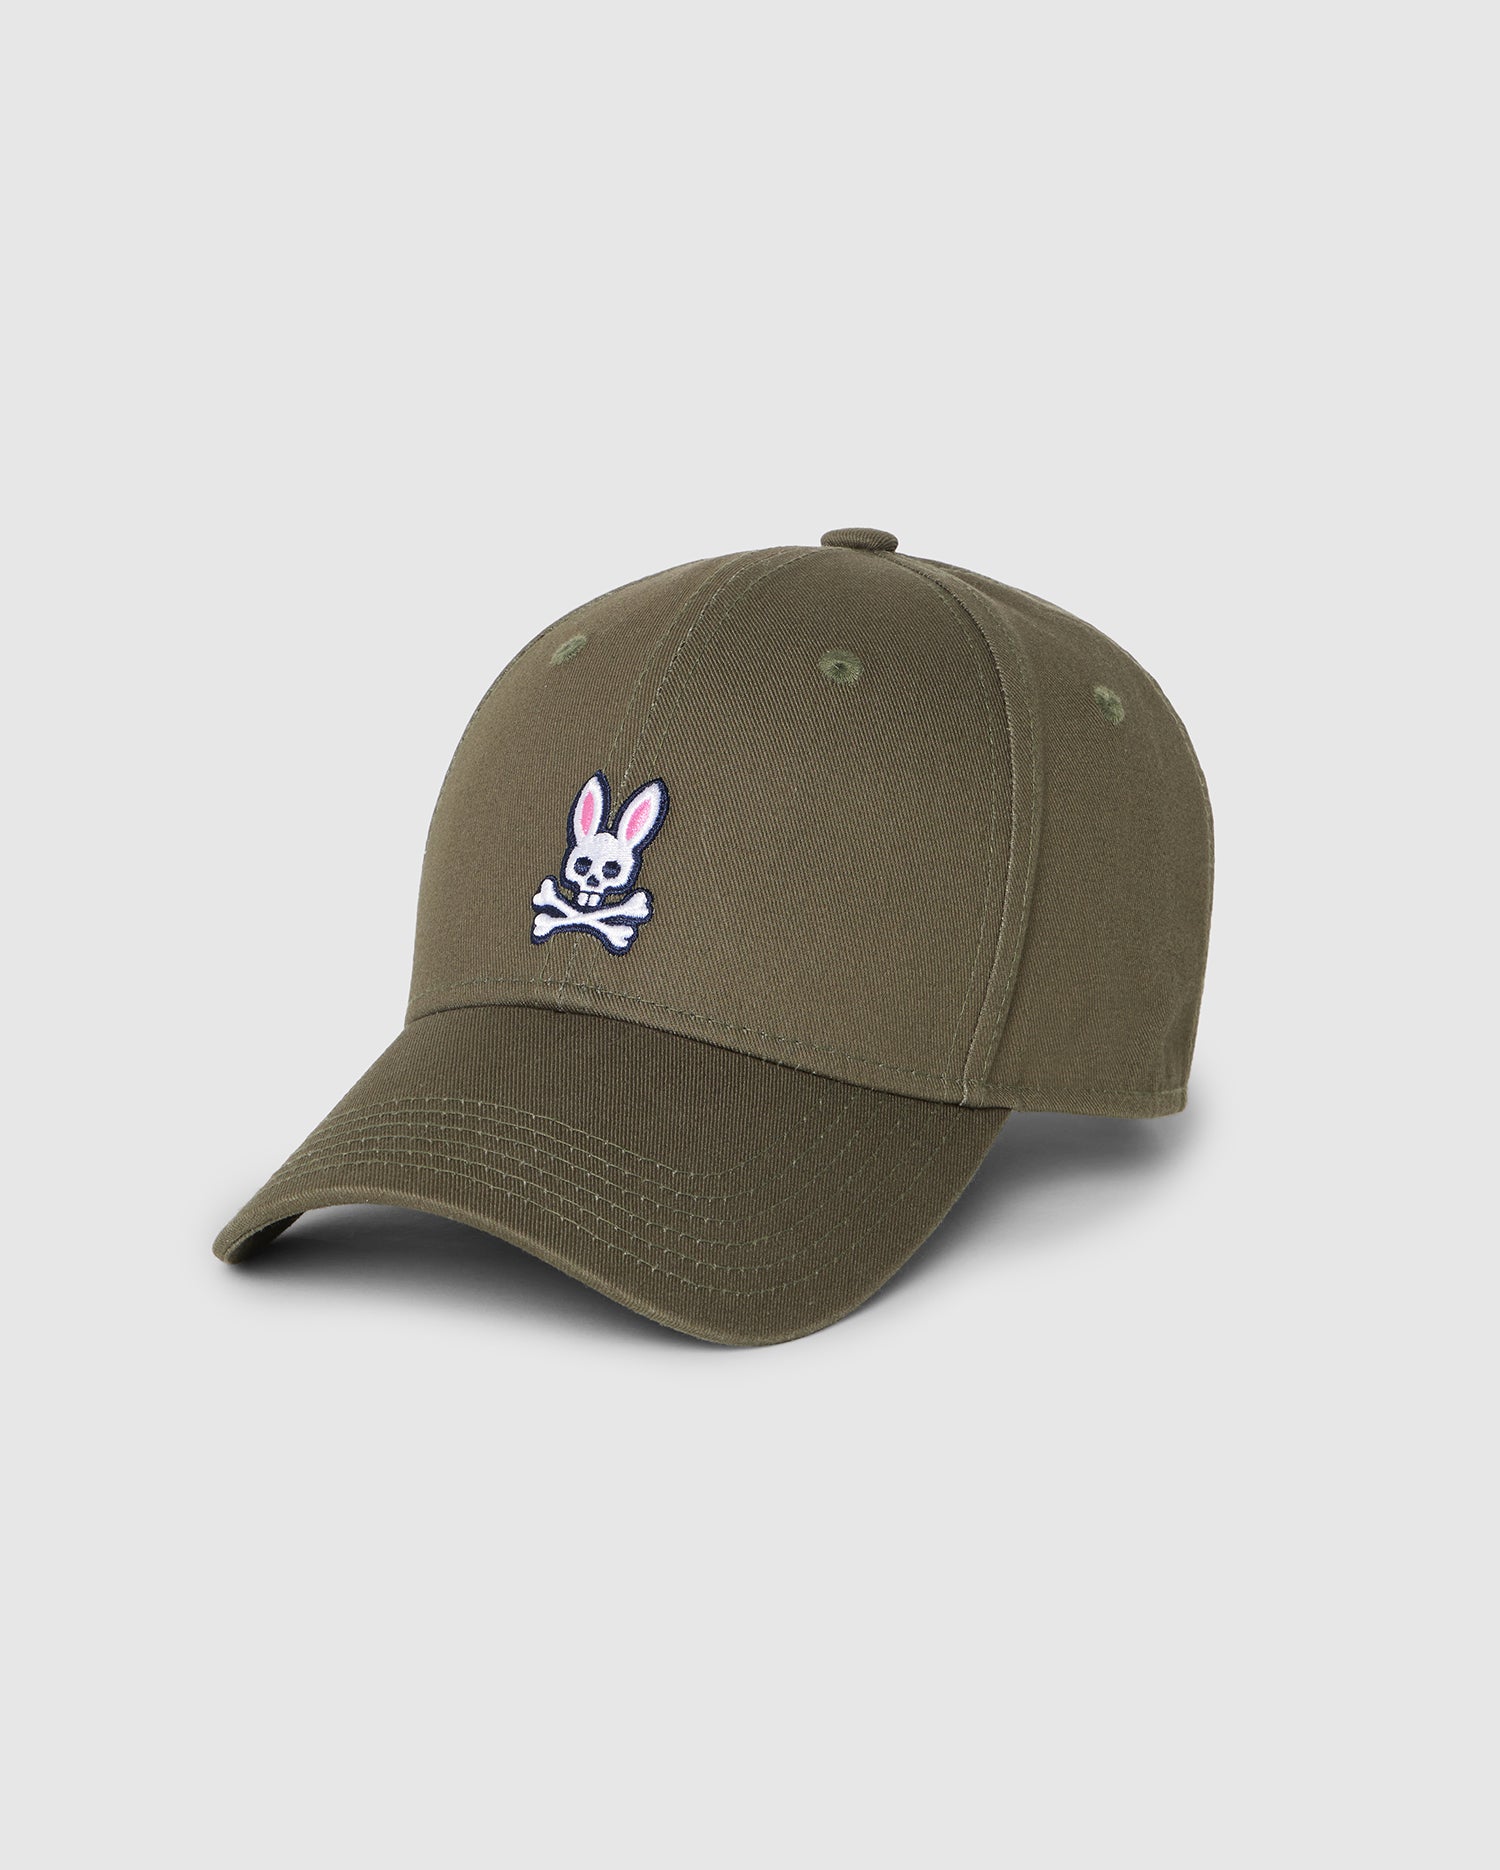 A men's classic baseball cap, the MENS CLASSIC BASEBALL CAP - B6A816B200 by Psycho Bunny, is made from 100% cotton and features an embroidered design of a white and pink cartoon rabbit above crossed bones on the front. The cap has a curved brim, ventilation holes on the top, and a plain white background.